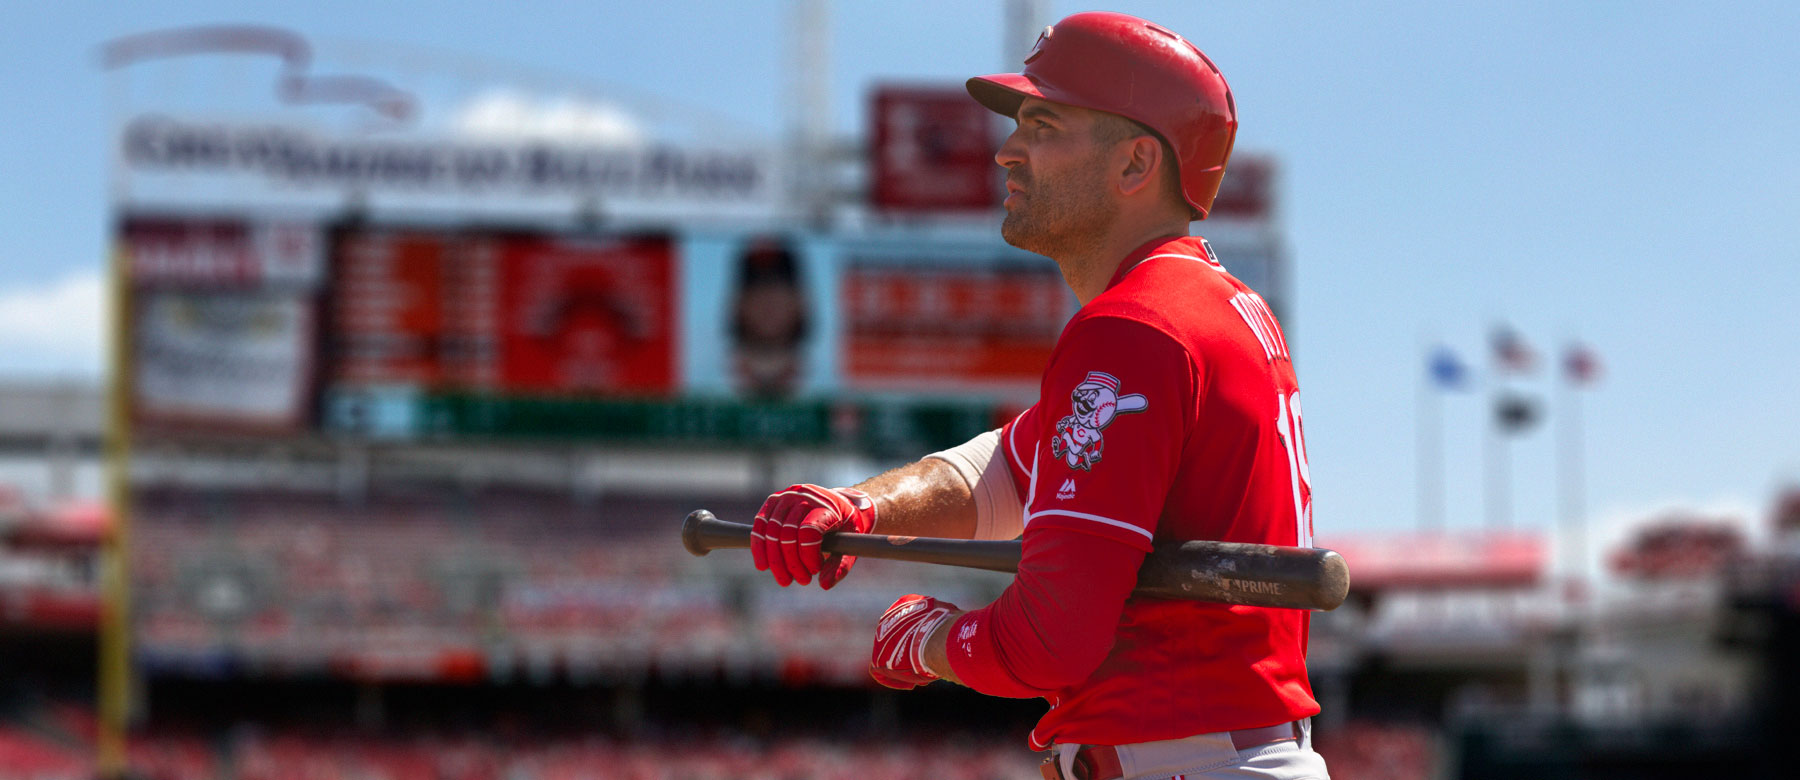 Joey Votto Wallpapers.